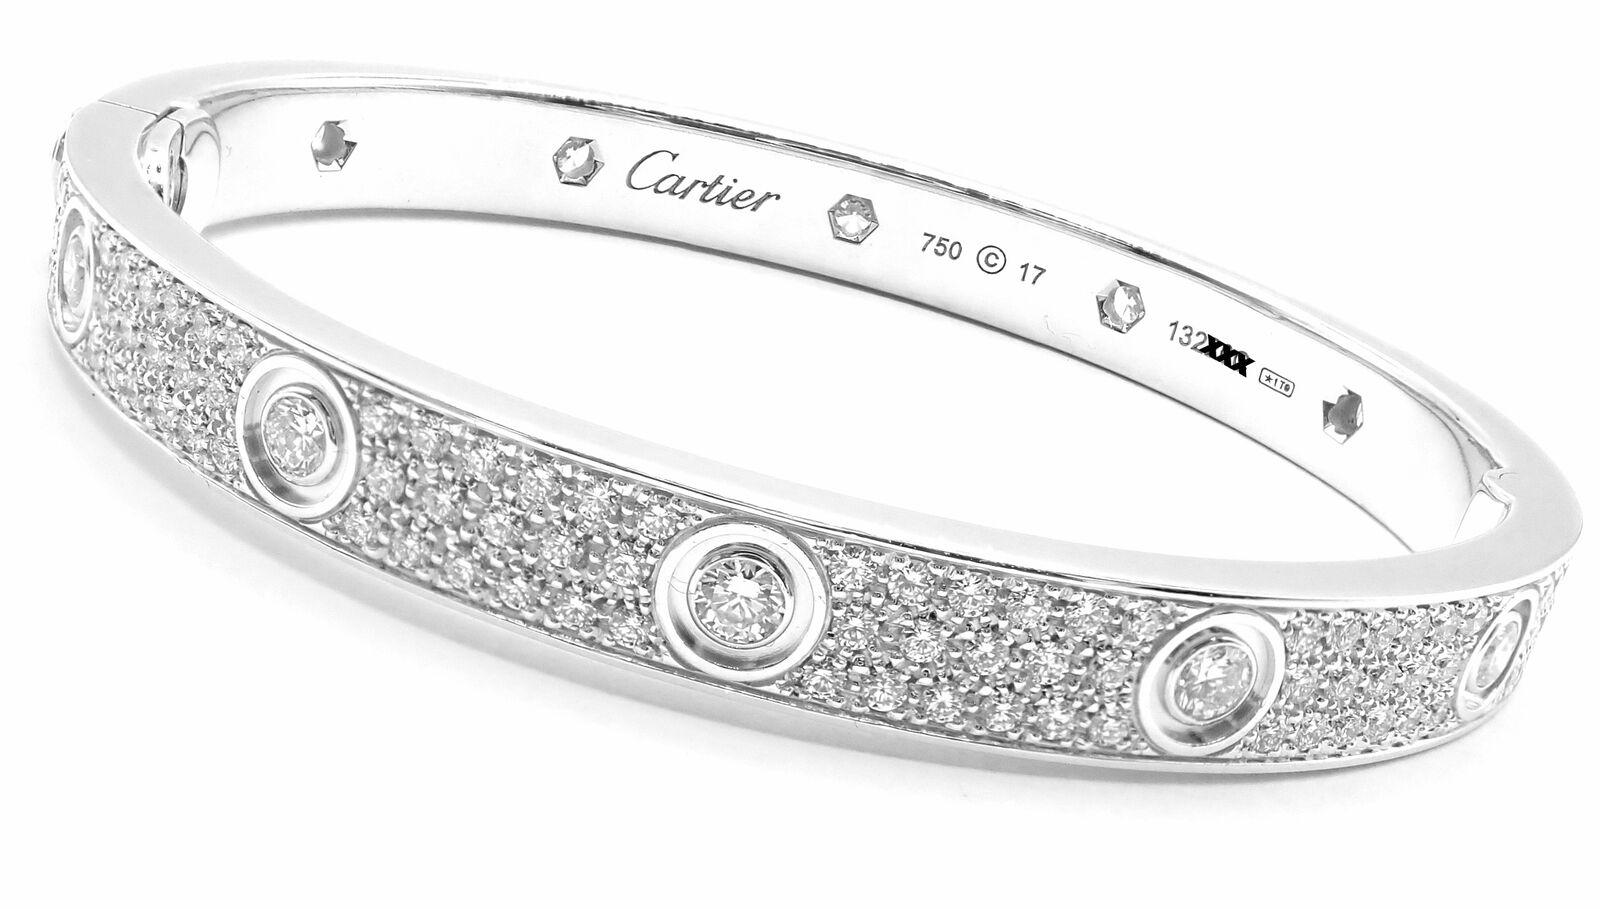 Authentic Cartier Love 18k White Gold Bracelet B6027200 with